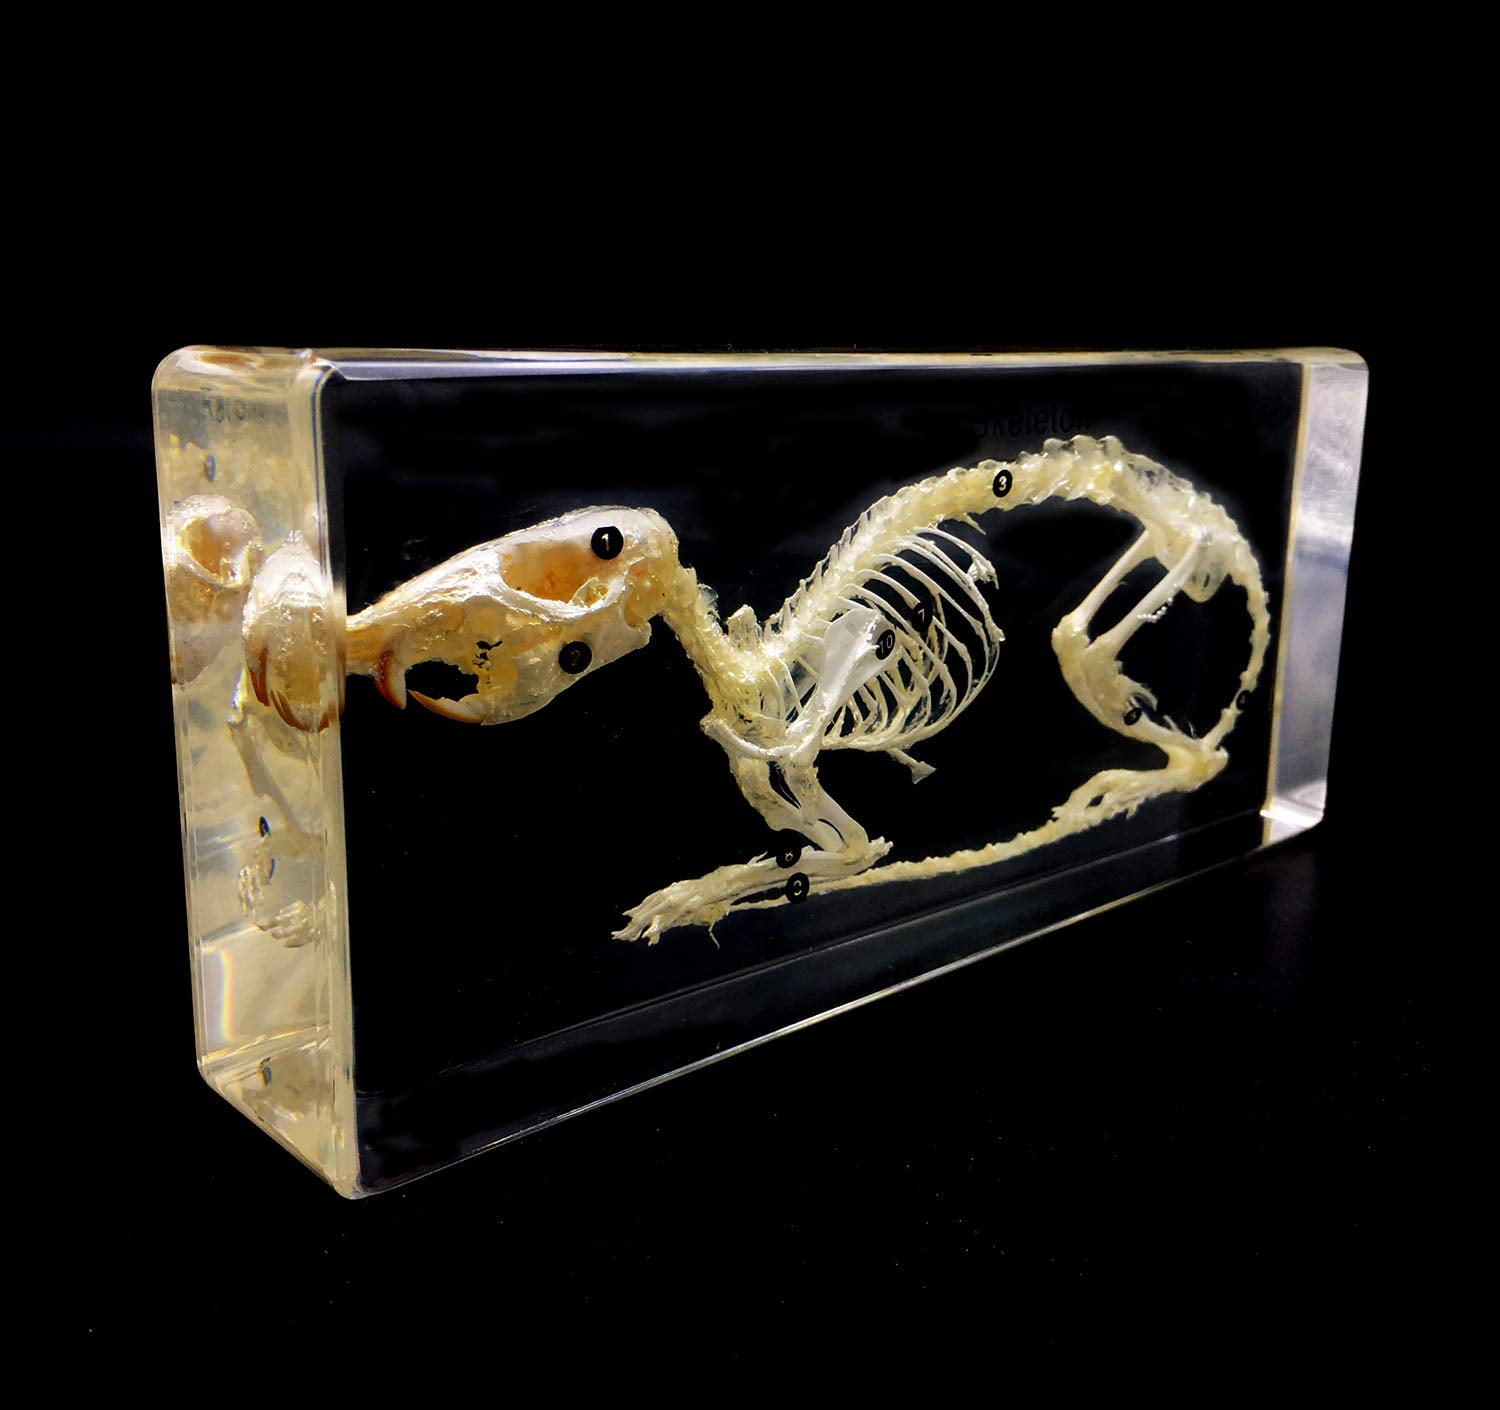 Real Rabbit Skeleton Specimen in Acrylic Block Paperweights Science Classroom Specimens for Science Education